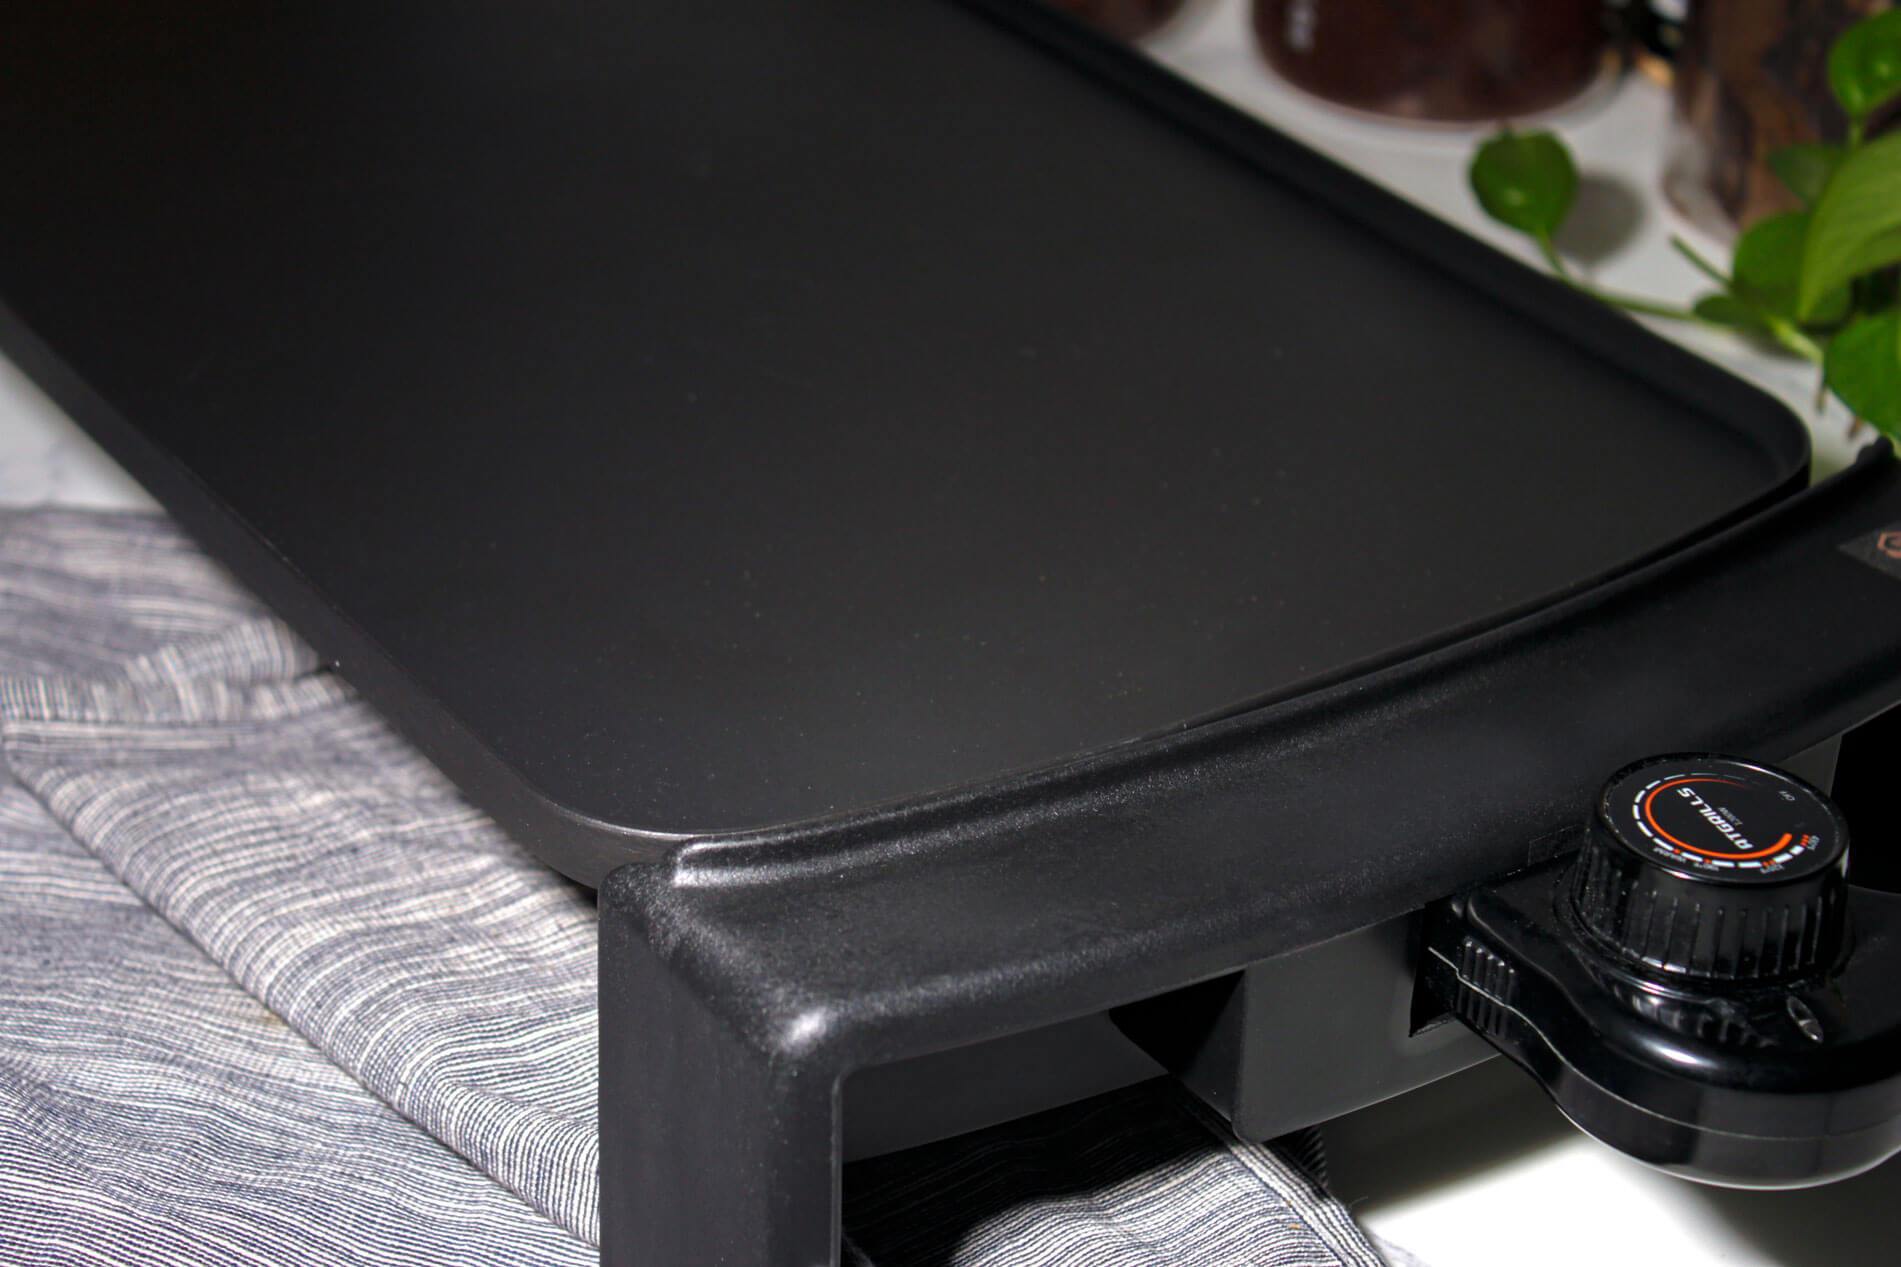 Black electric griddle with temperature controller